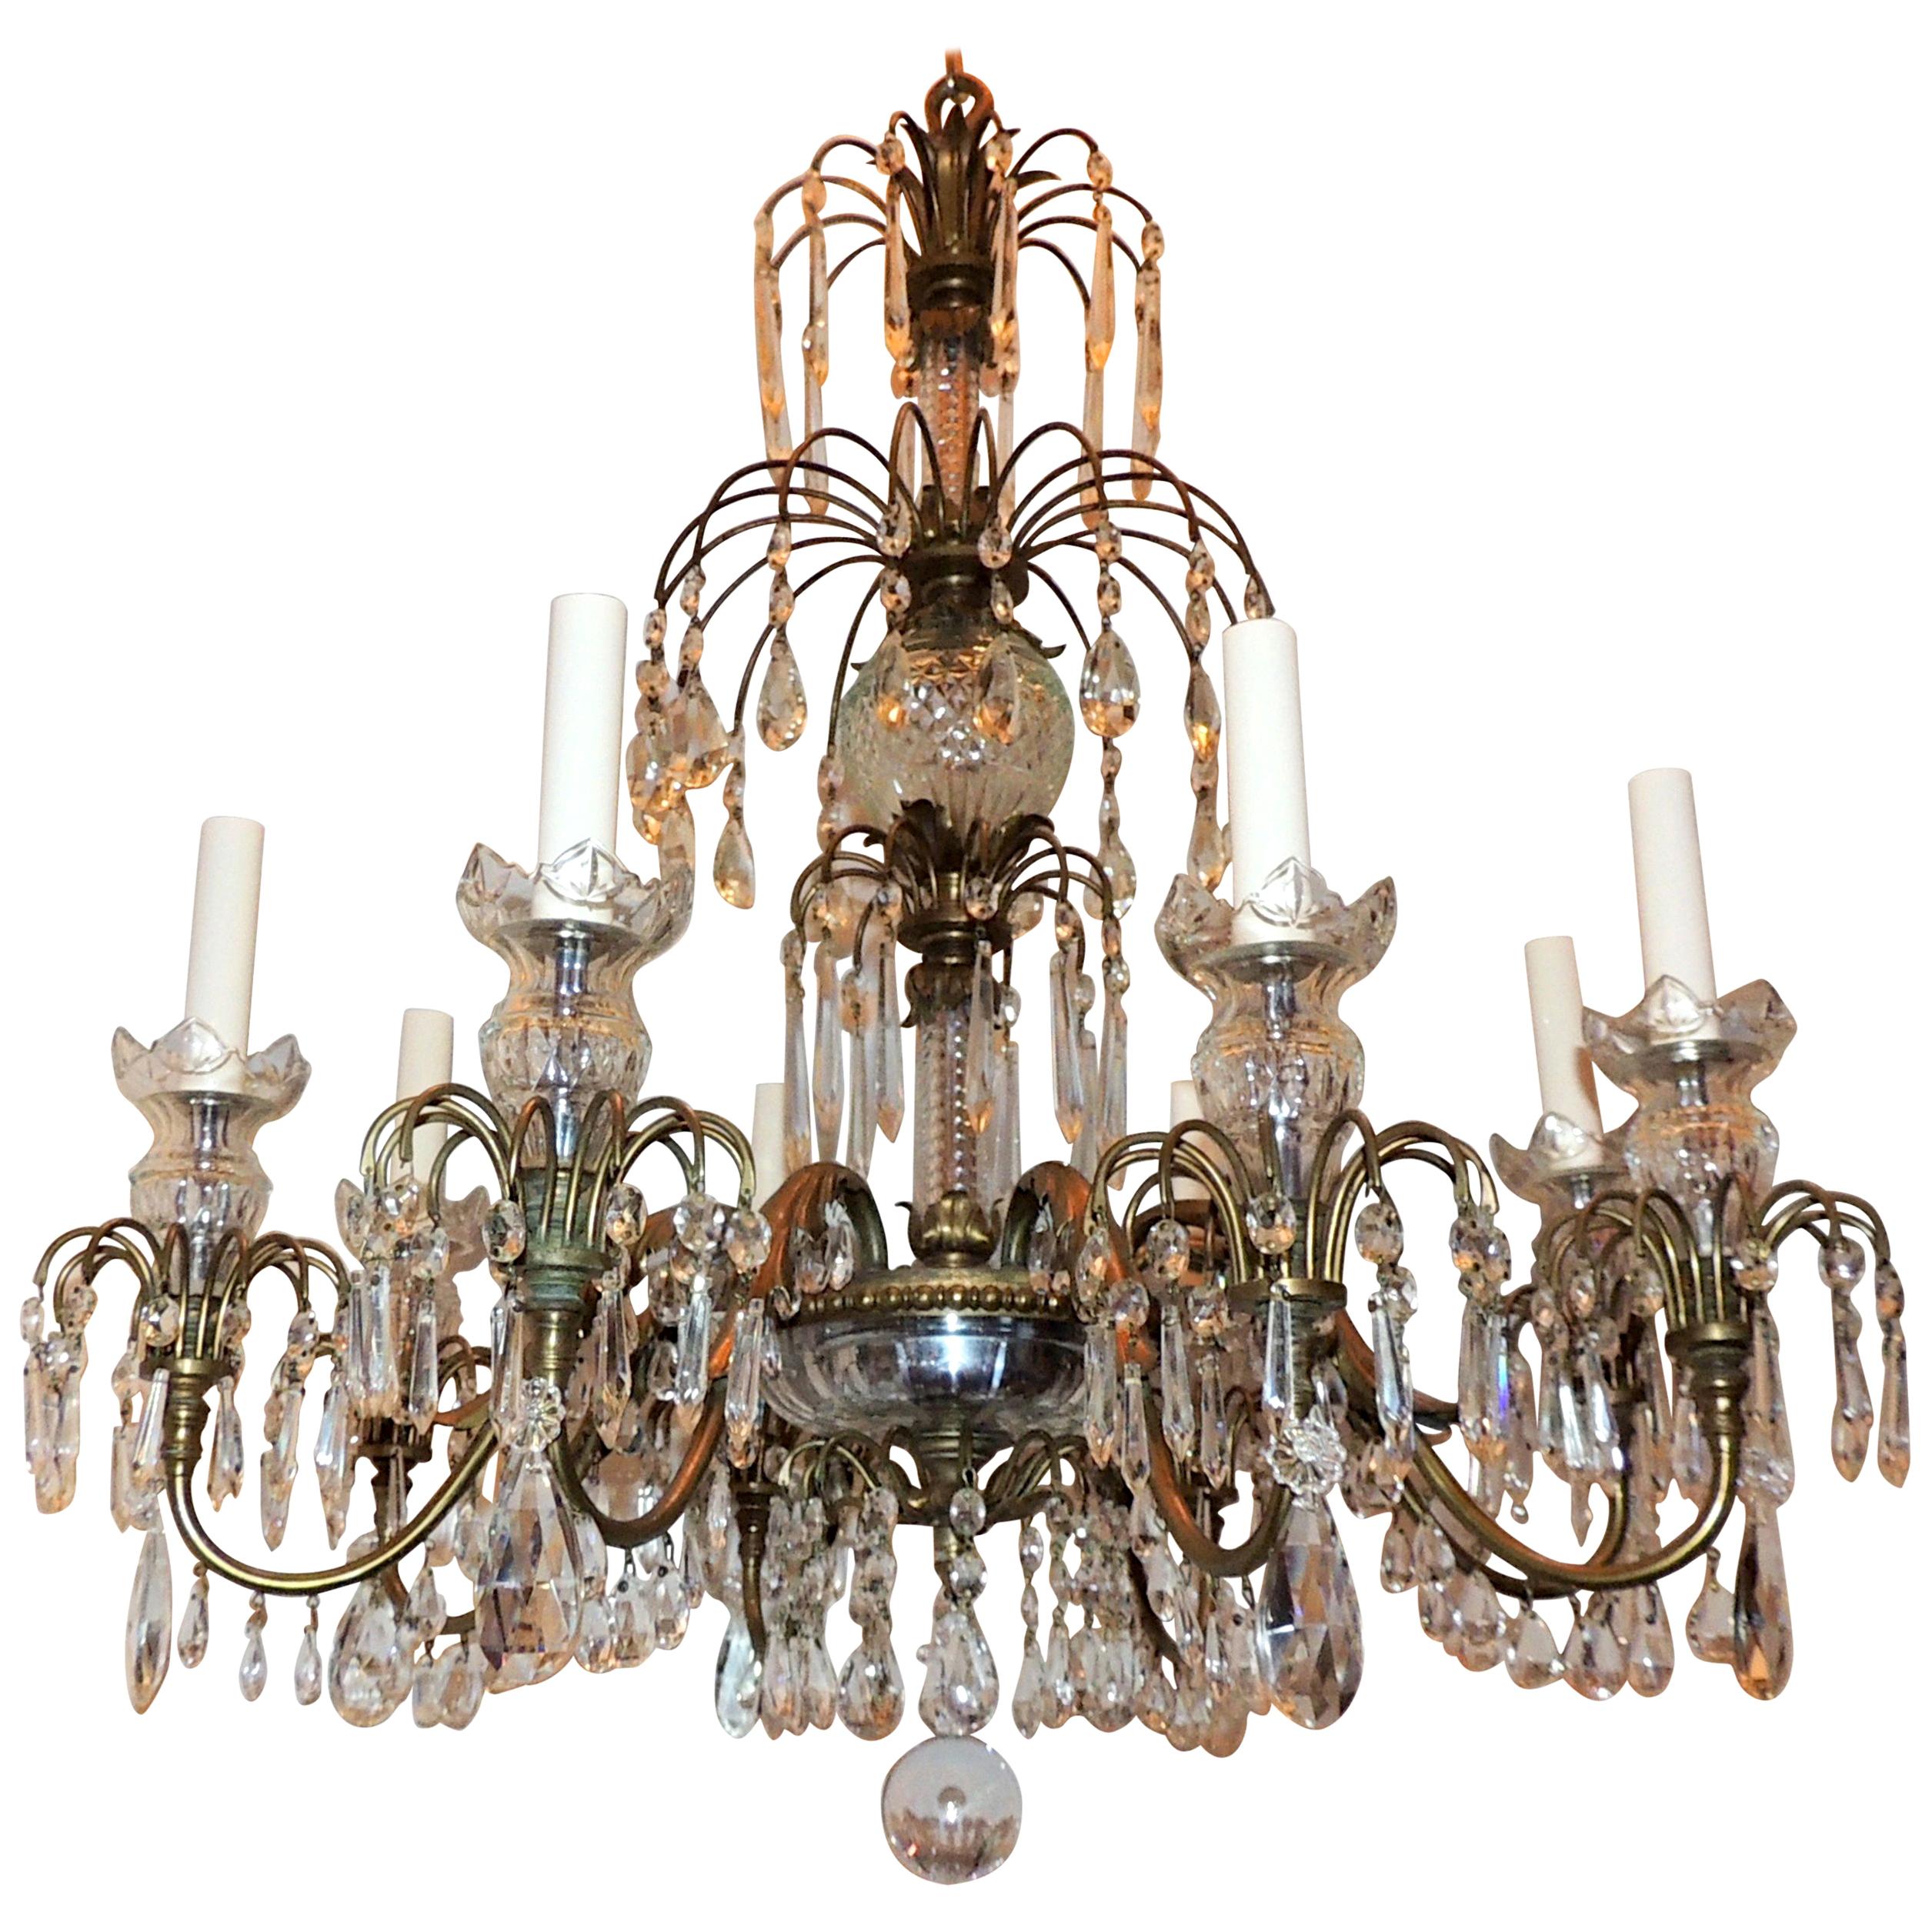 Wonderful French Neoclassical Bronze Crystal Regency Baltic Empire Chandelier For Sale